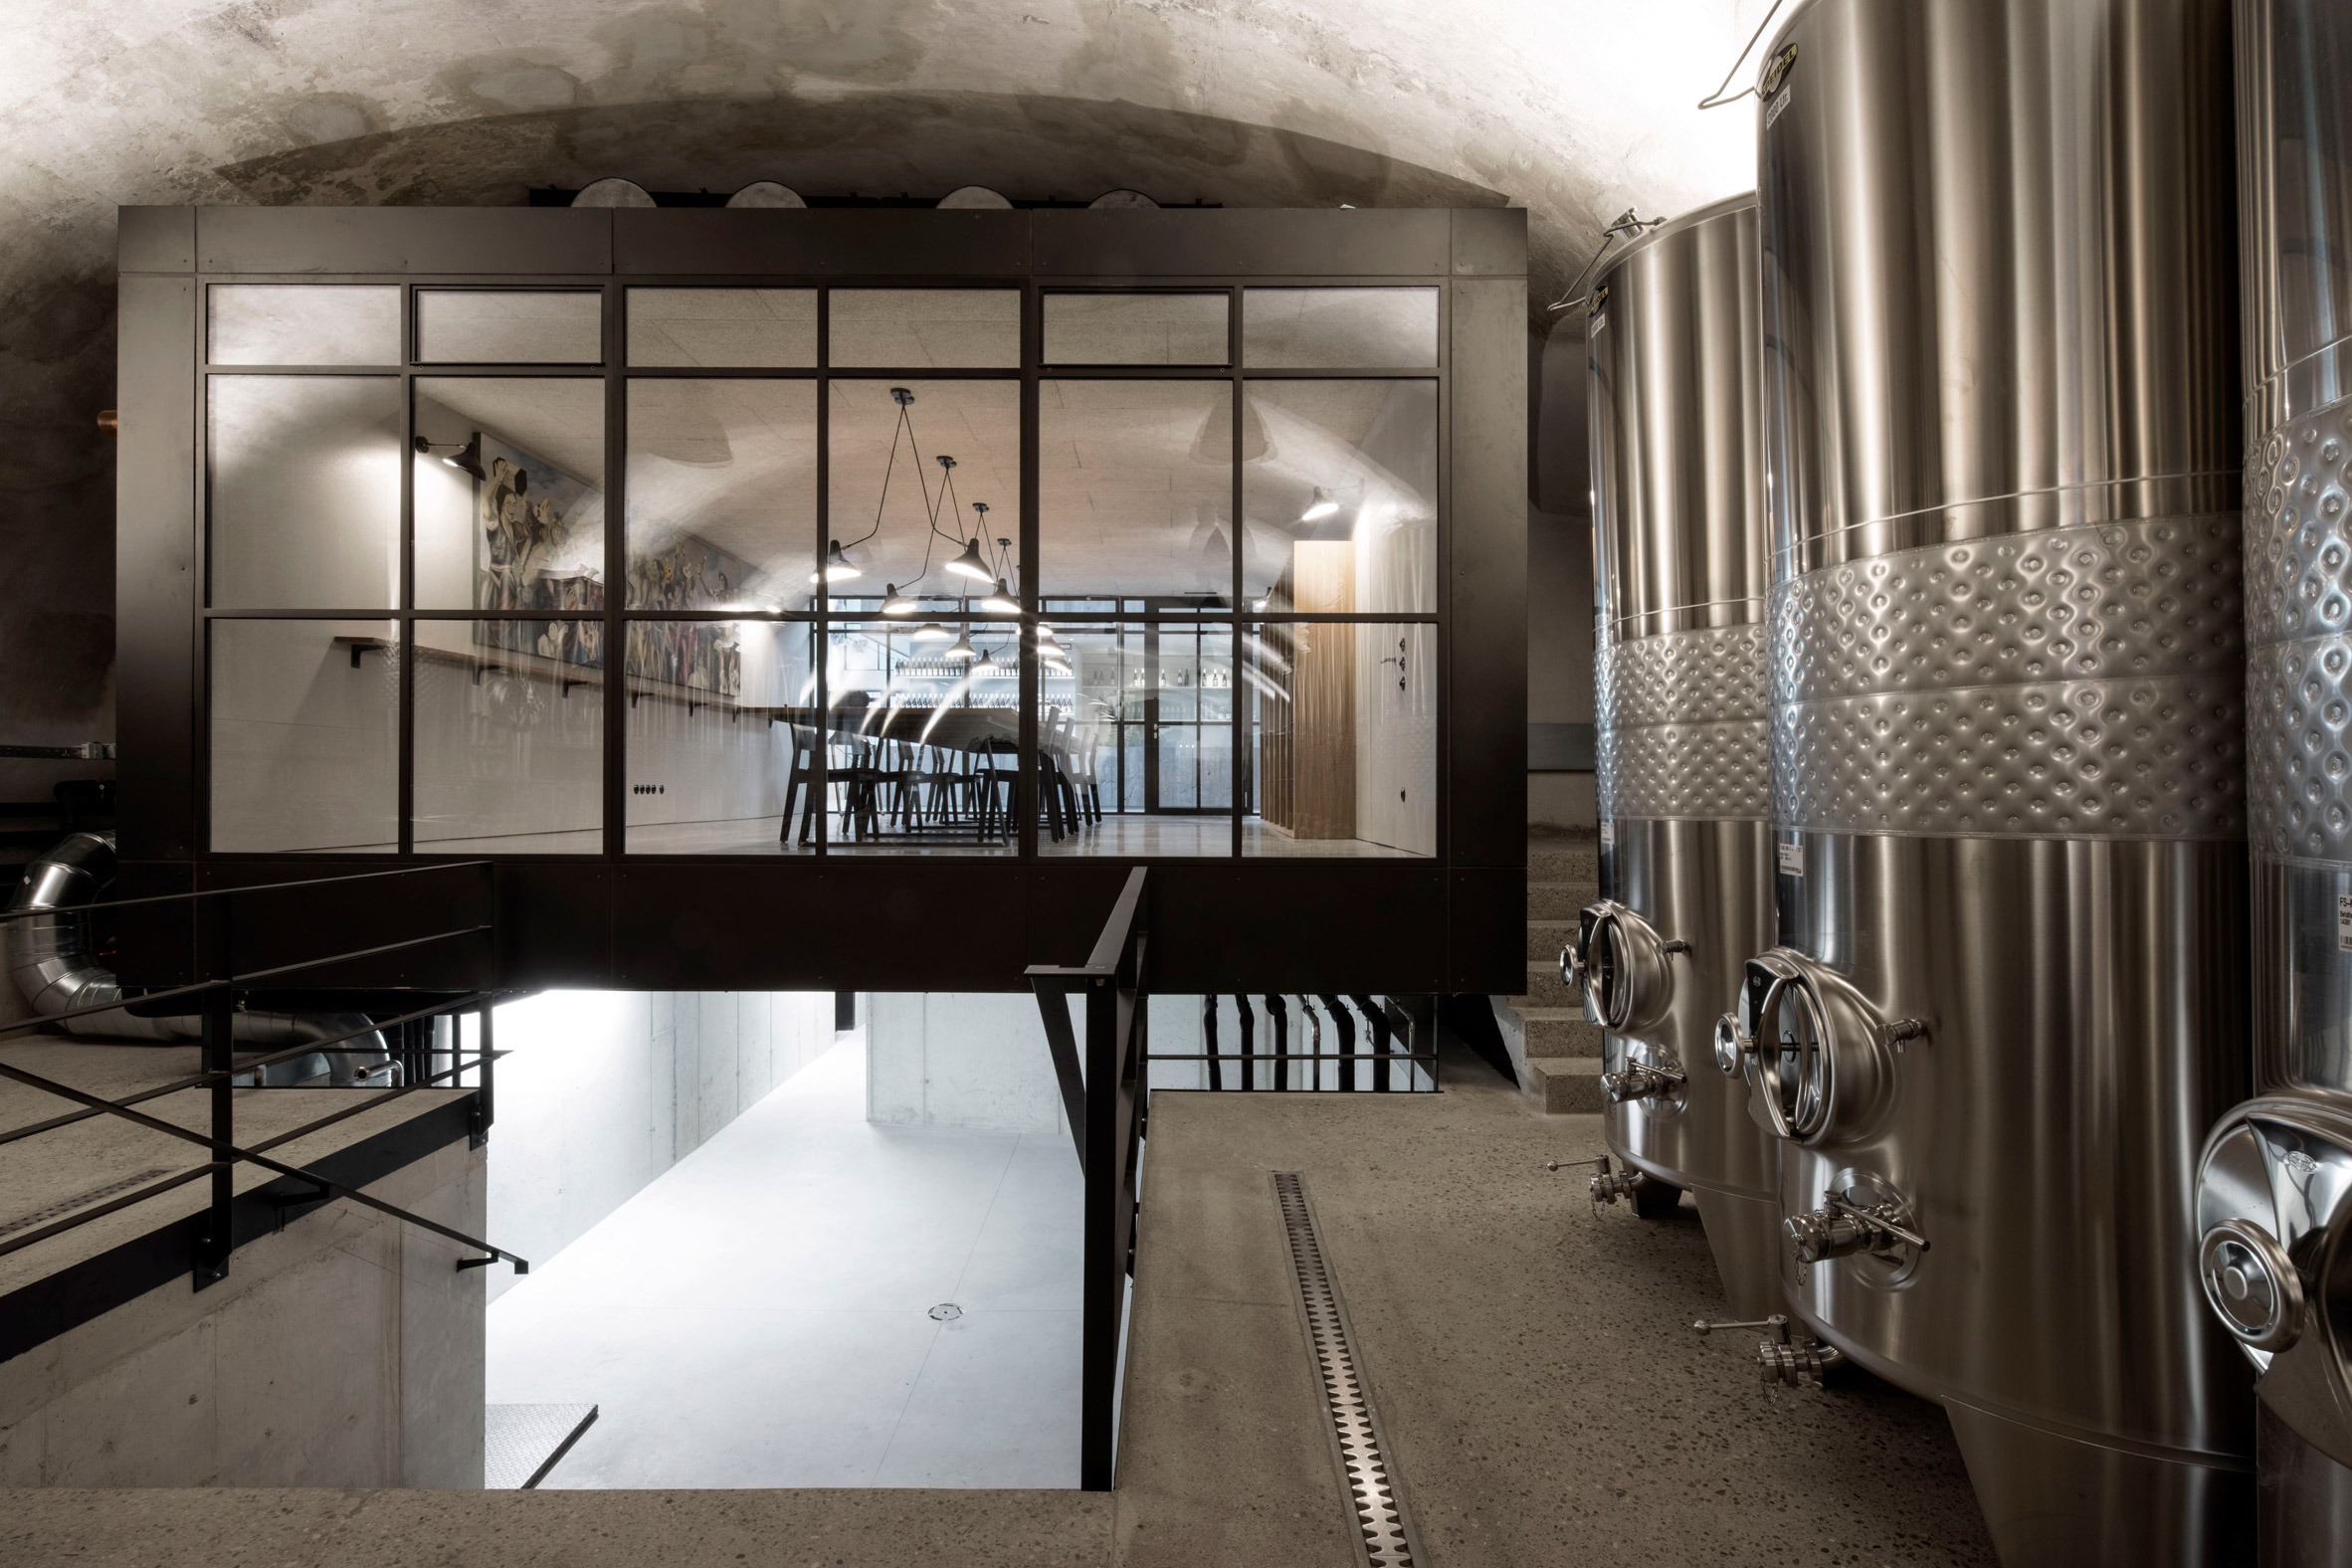 Clemens Strobl winery by Destilat features greyscale interiors